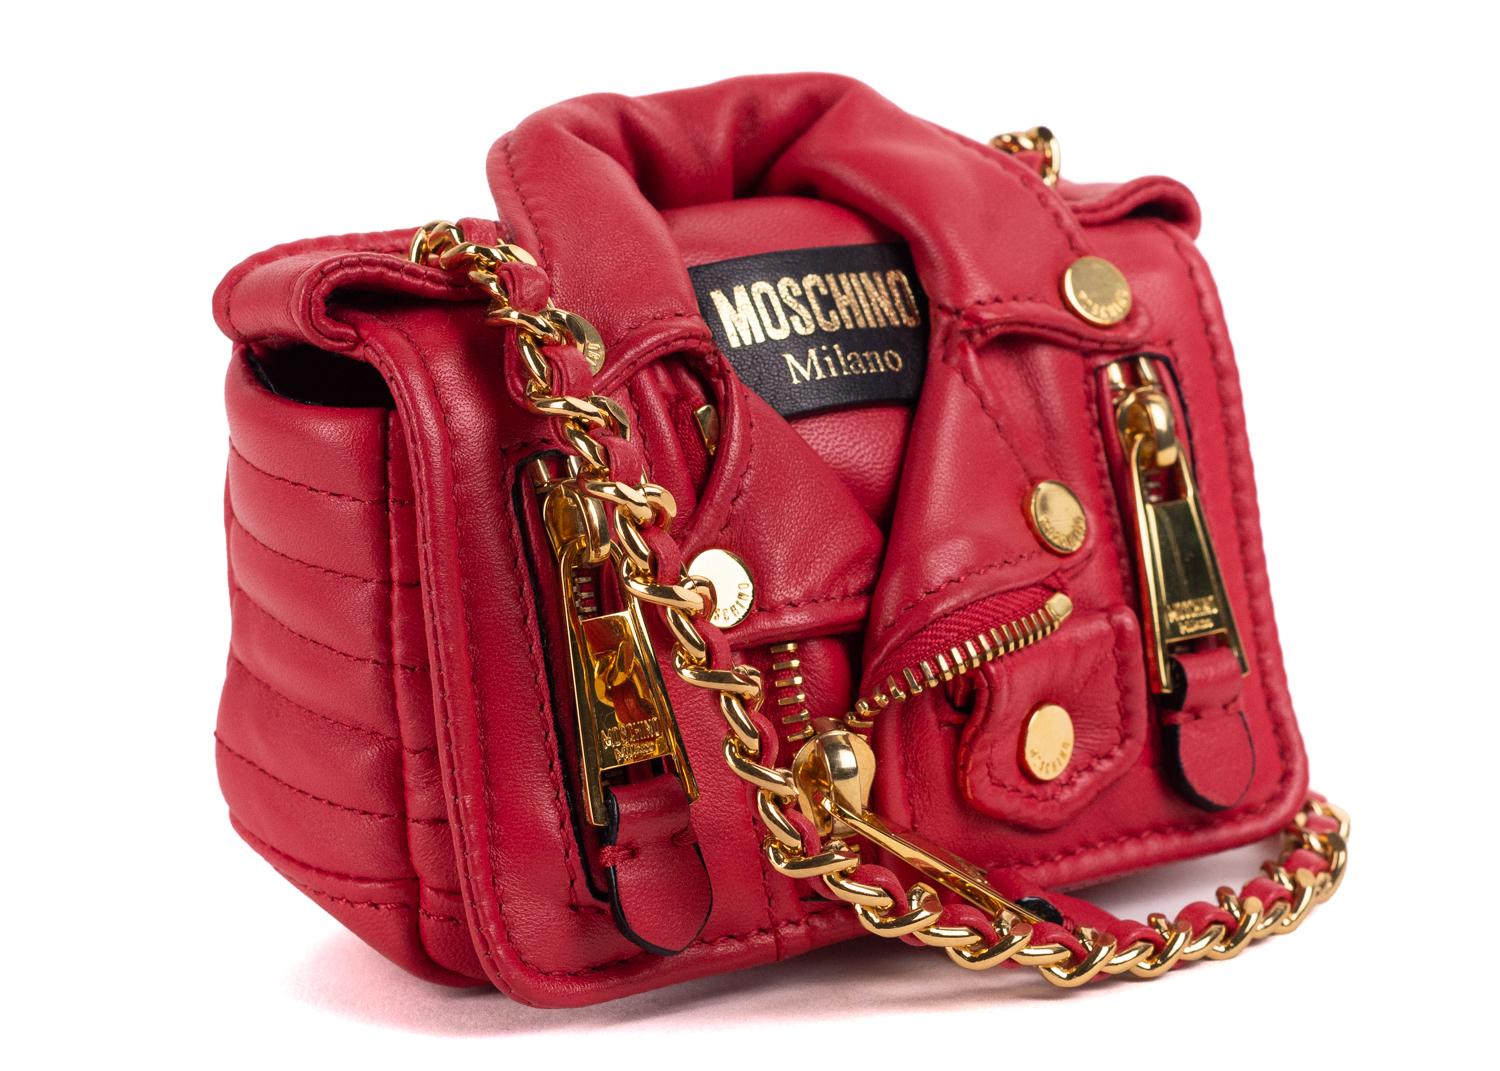 Moschino creative director Jeremy Scott reinvents the moto jacket a must in everyones wardrobe with this street chic leather bag. Perfect statemented bag for all seasons and throughout the years.

Moschino lambskin leather shoulder bag
Unique moto